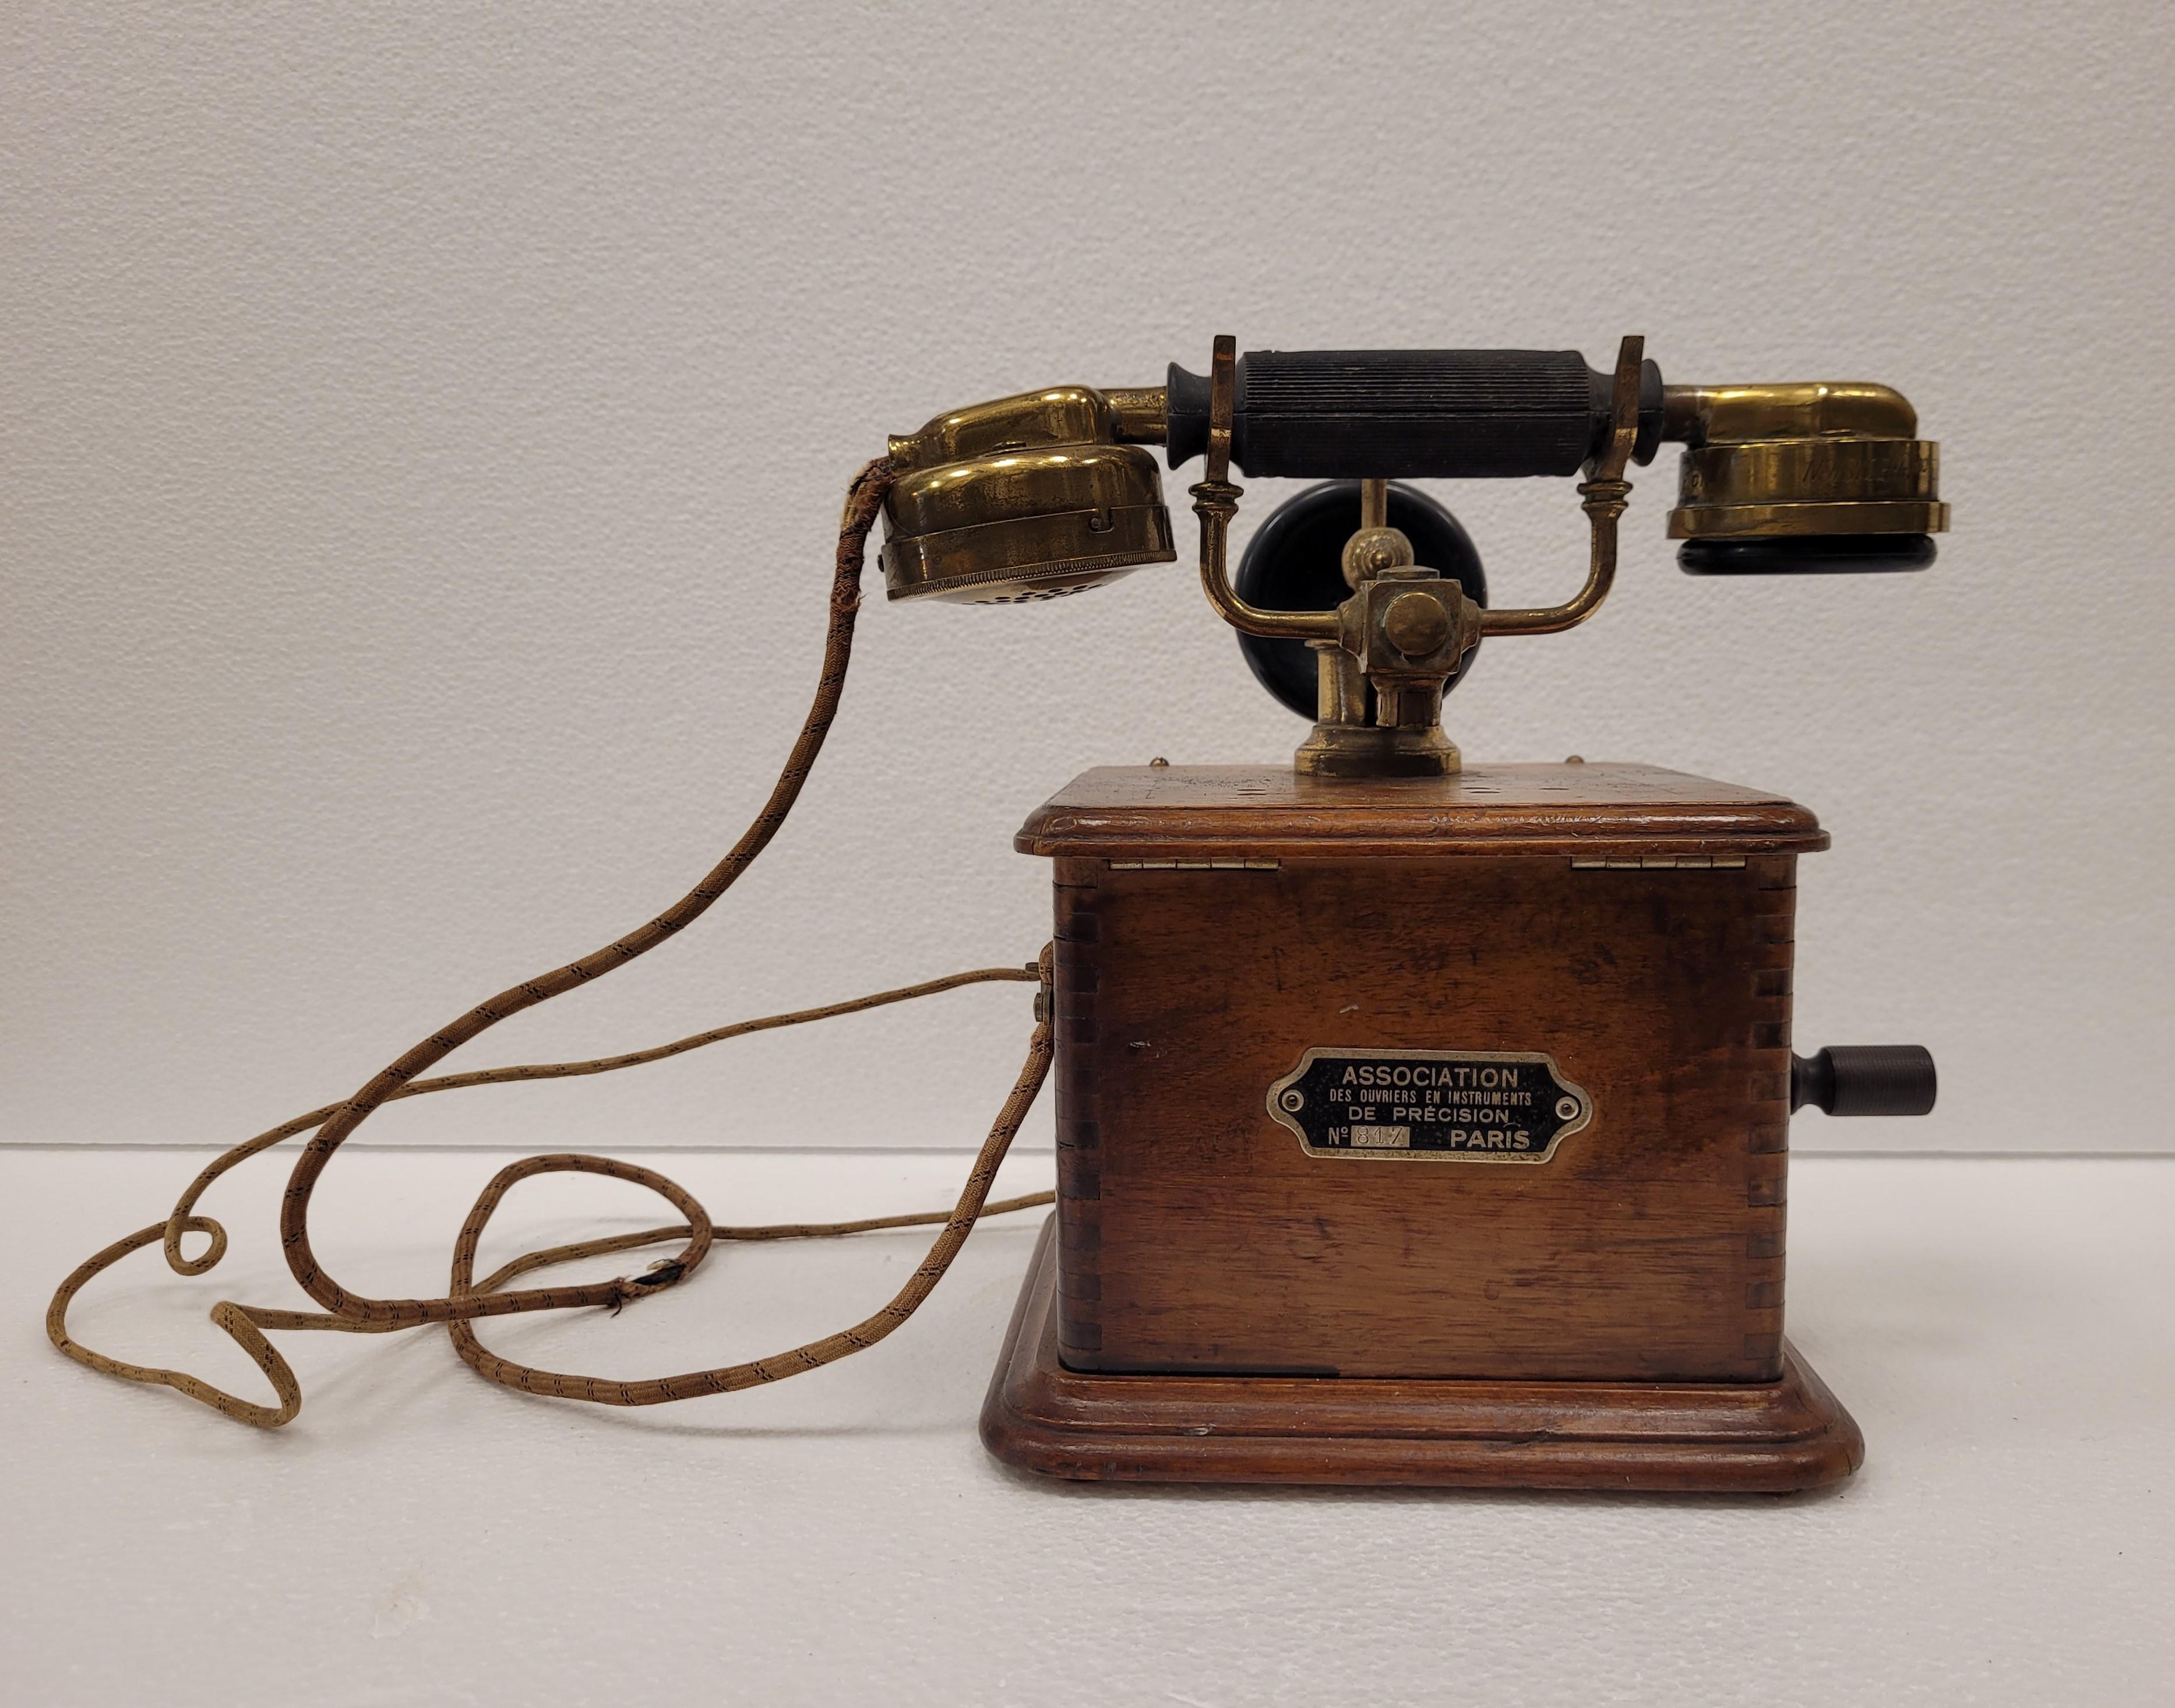 Amazing Art Nouveau black and wooden  French Telephone, by AOIP.
 At the end of the 19th century, sixty-four workers from the Paris Chamber of Precision Instrument Workers came together to create their company. It was the secretary of this union